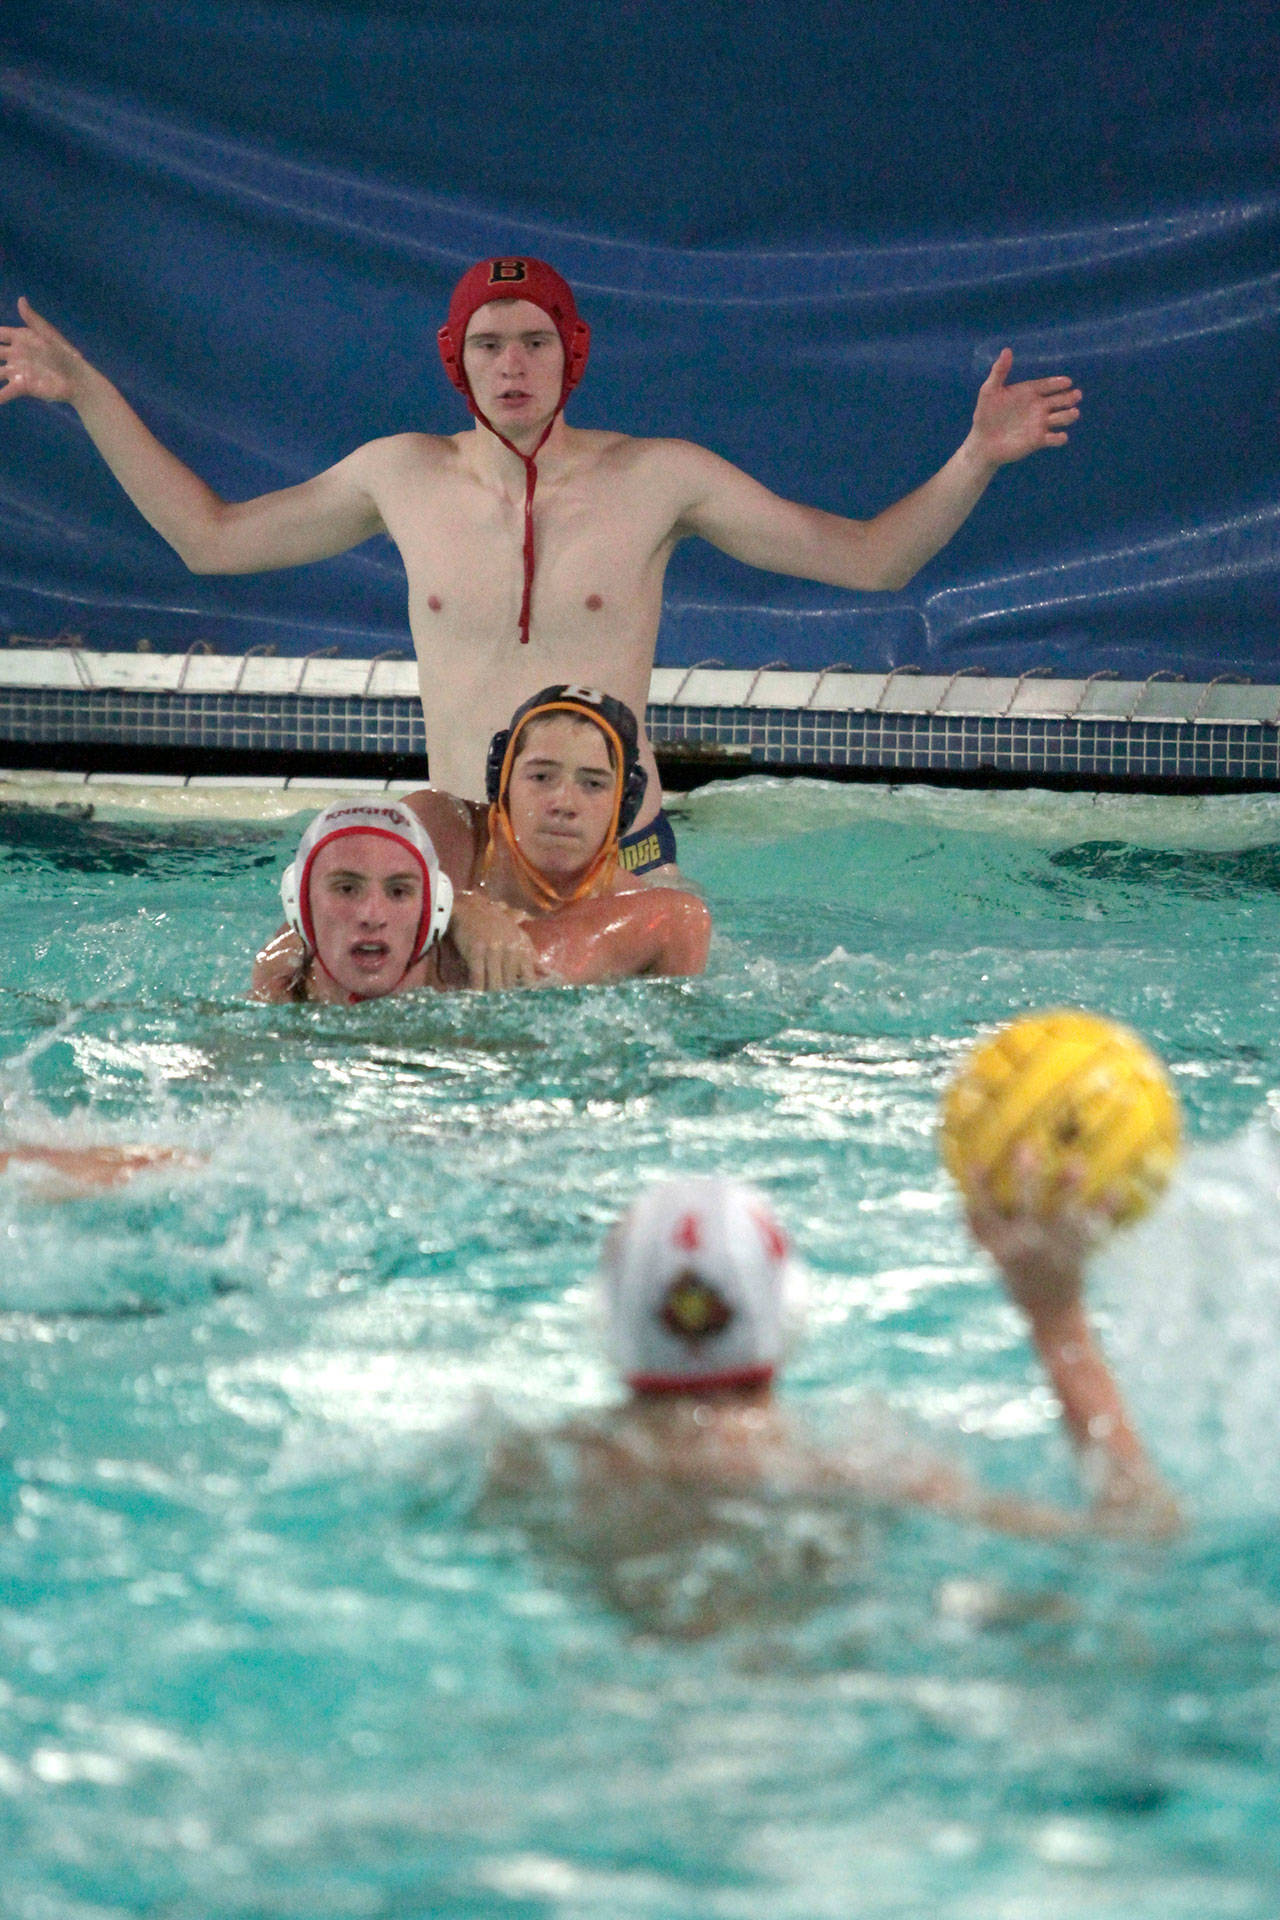 Luciano Marano | Bainbridge Island Review - The Bainbridge High School varsity boys water polo team escaped from a slow start to claim a decisive 19-8 win against the visitors from Newport High in their first match of the season Tuesday, Sept. 10.